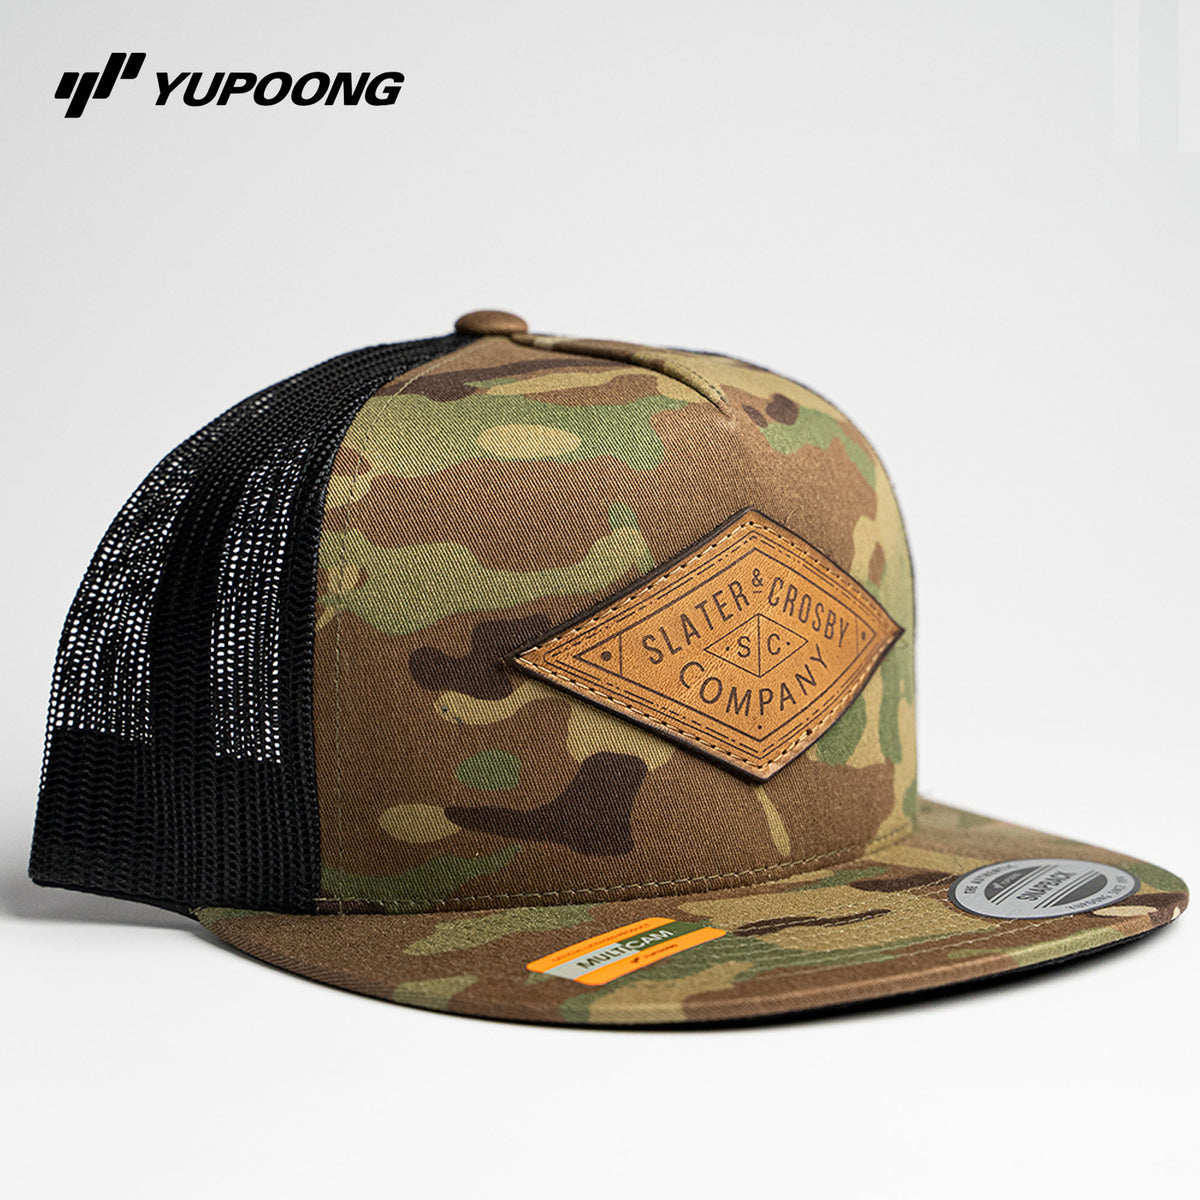 Yupoong 6006MC MultiCam Custom Leather Snapback with - Hat Mesh Holtz LOG YOUR Trucker